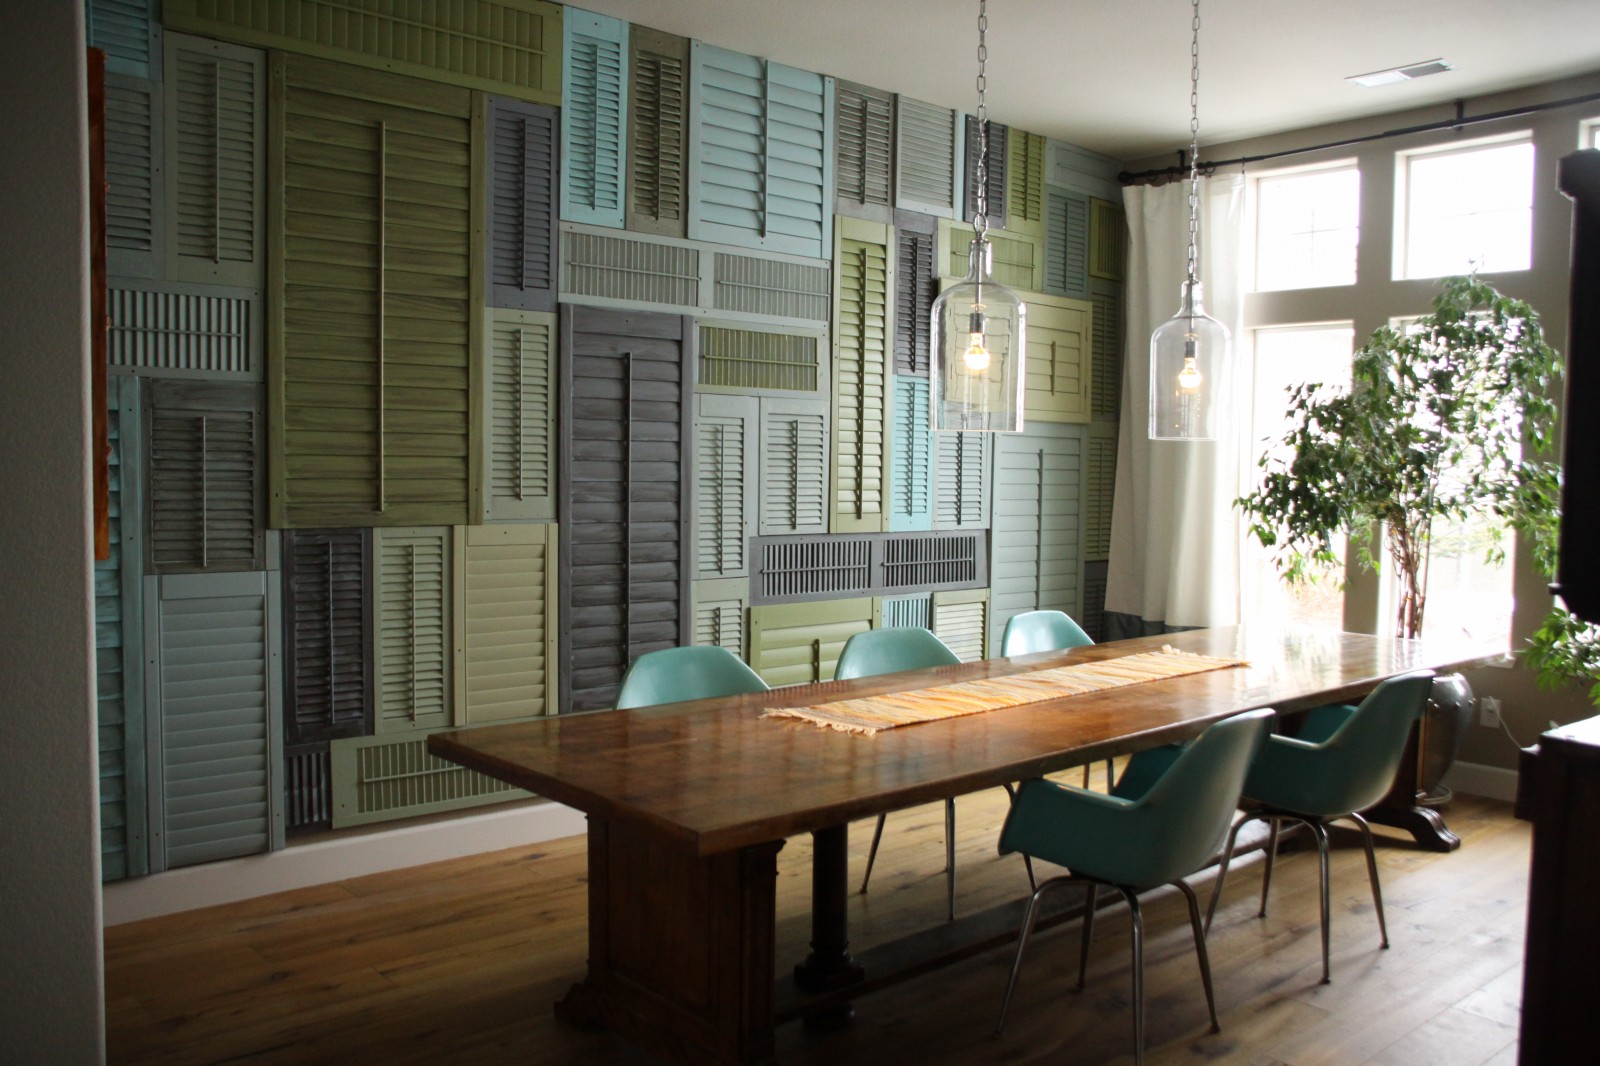 A dining room with repurposed old window shutters on the wall.